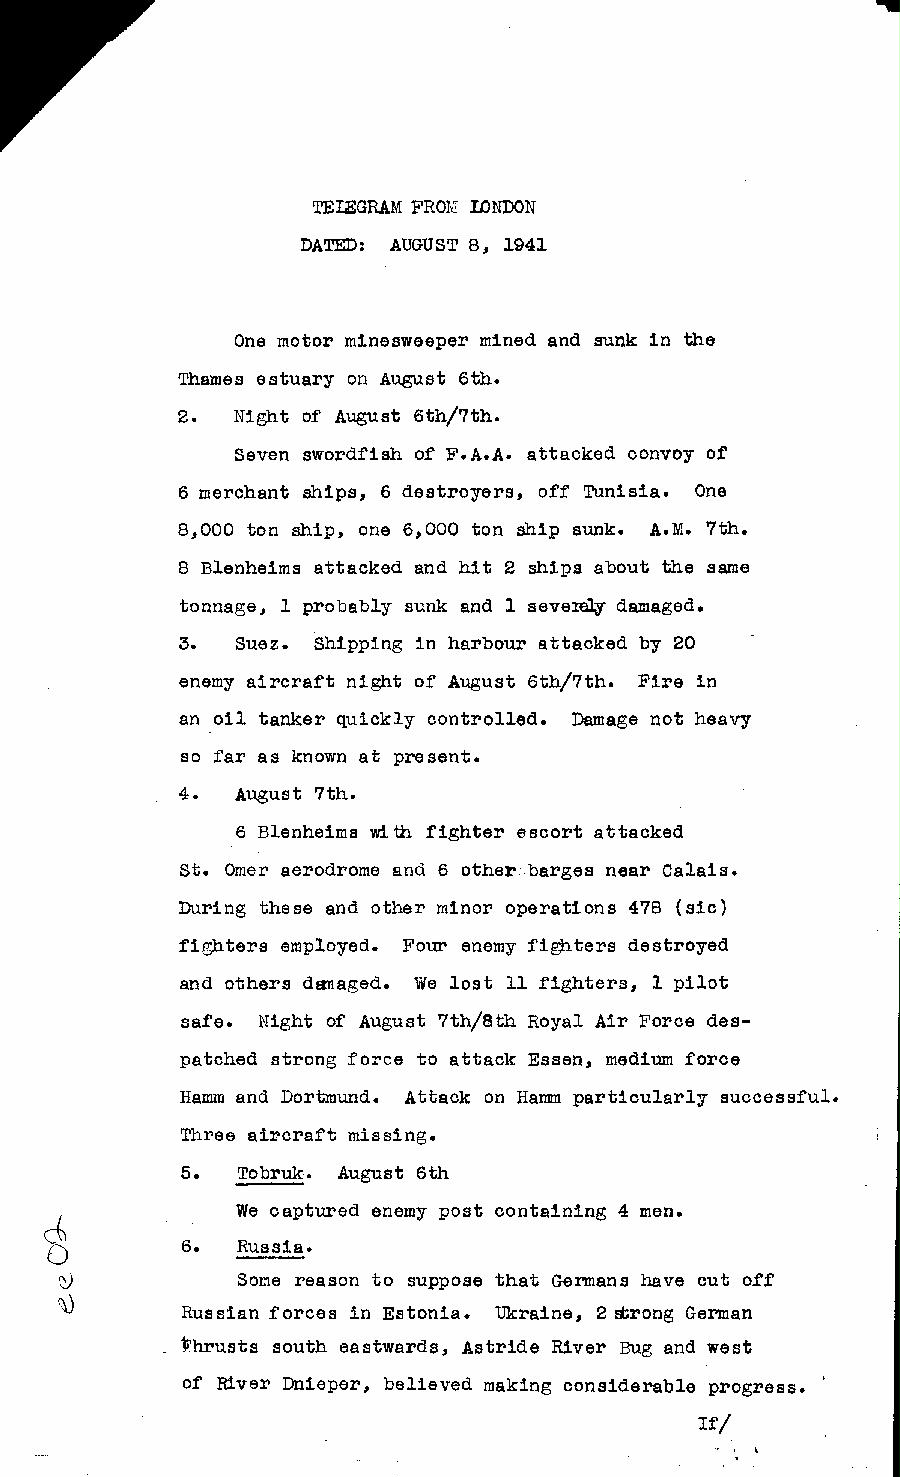 [a322ee02.jpg] - Report on military situation 8/8/41